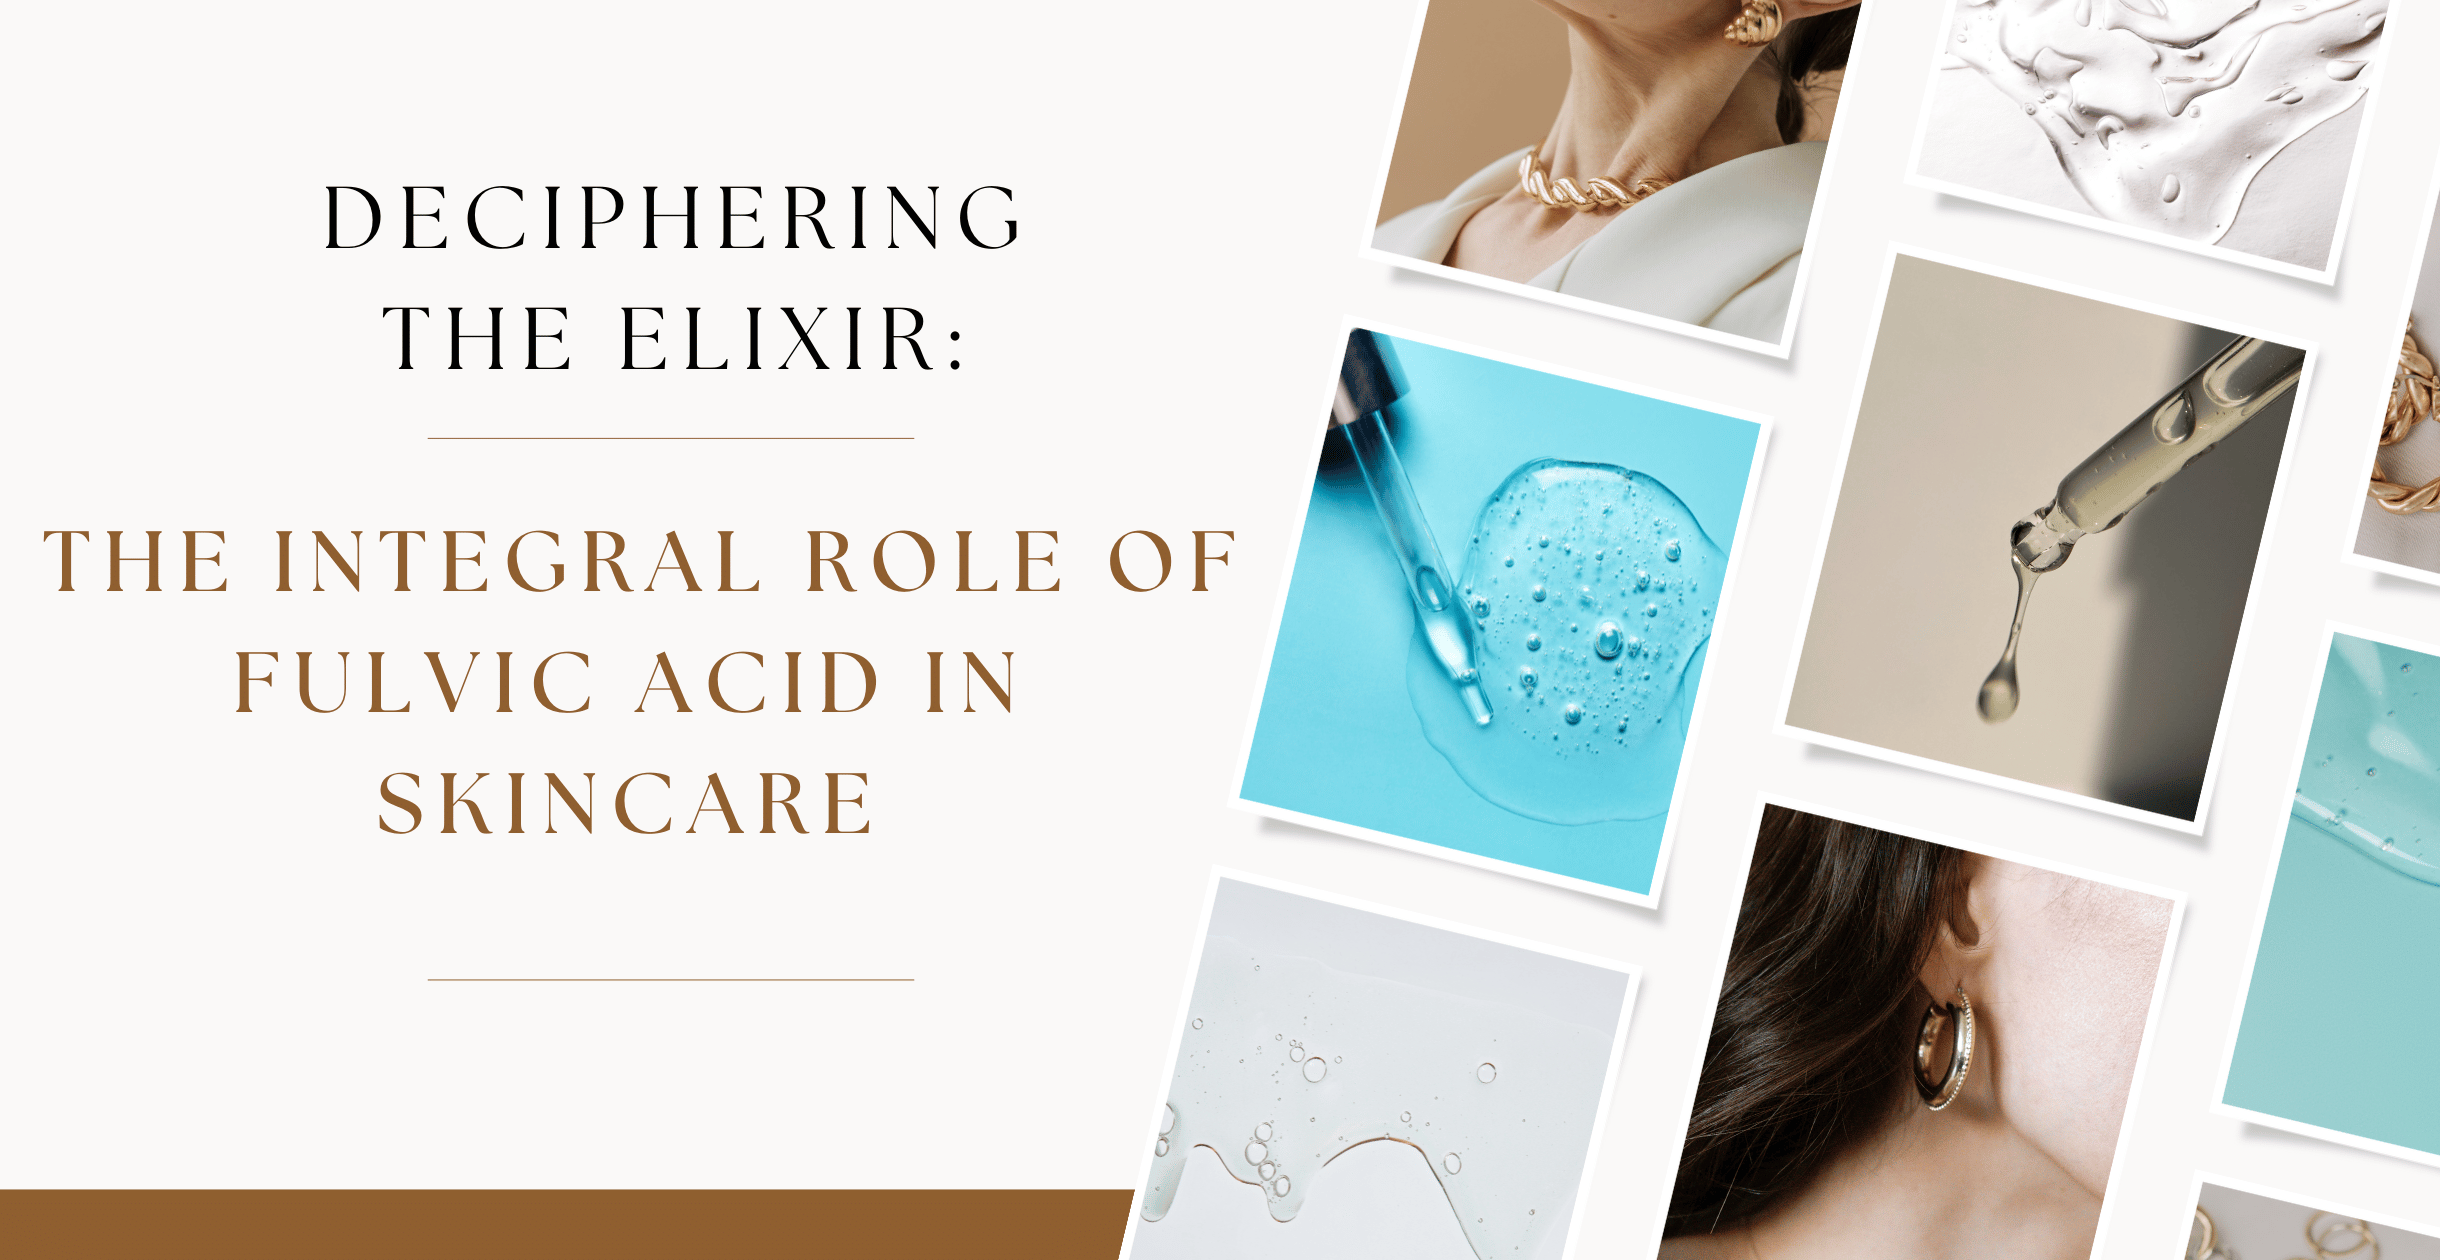 Deciphering the Elixir: The Integral Role of Fulvic Acid in Skincare